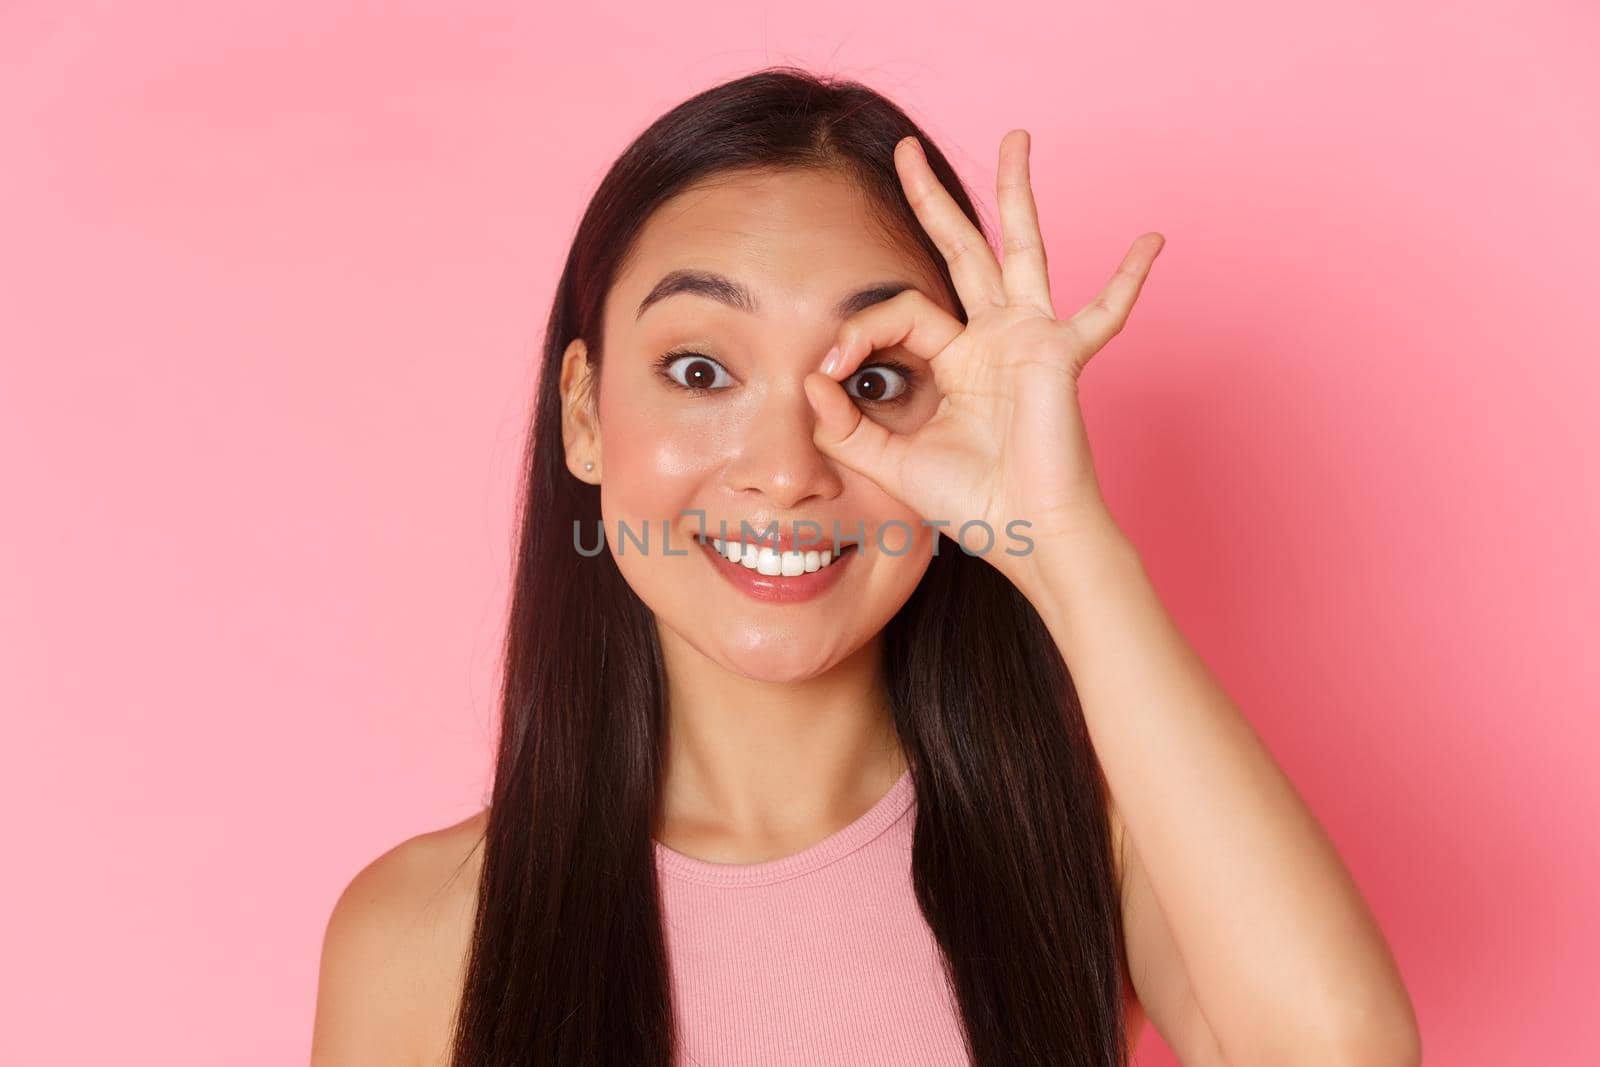 Beauty, fashion and lifestyle concept. Close-up of dreamy and cute asian young girl looking through okay gesture or showing zero, smiling upbeat, found something perfect, pink background.